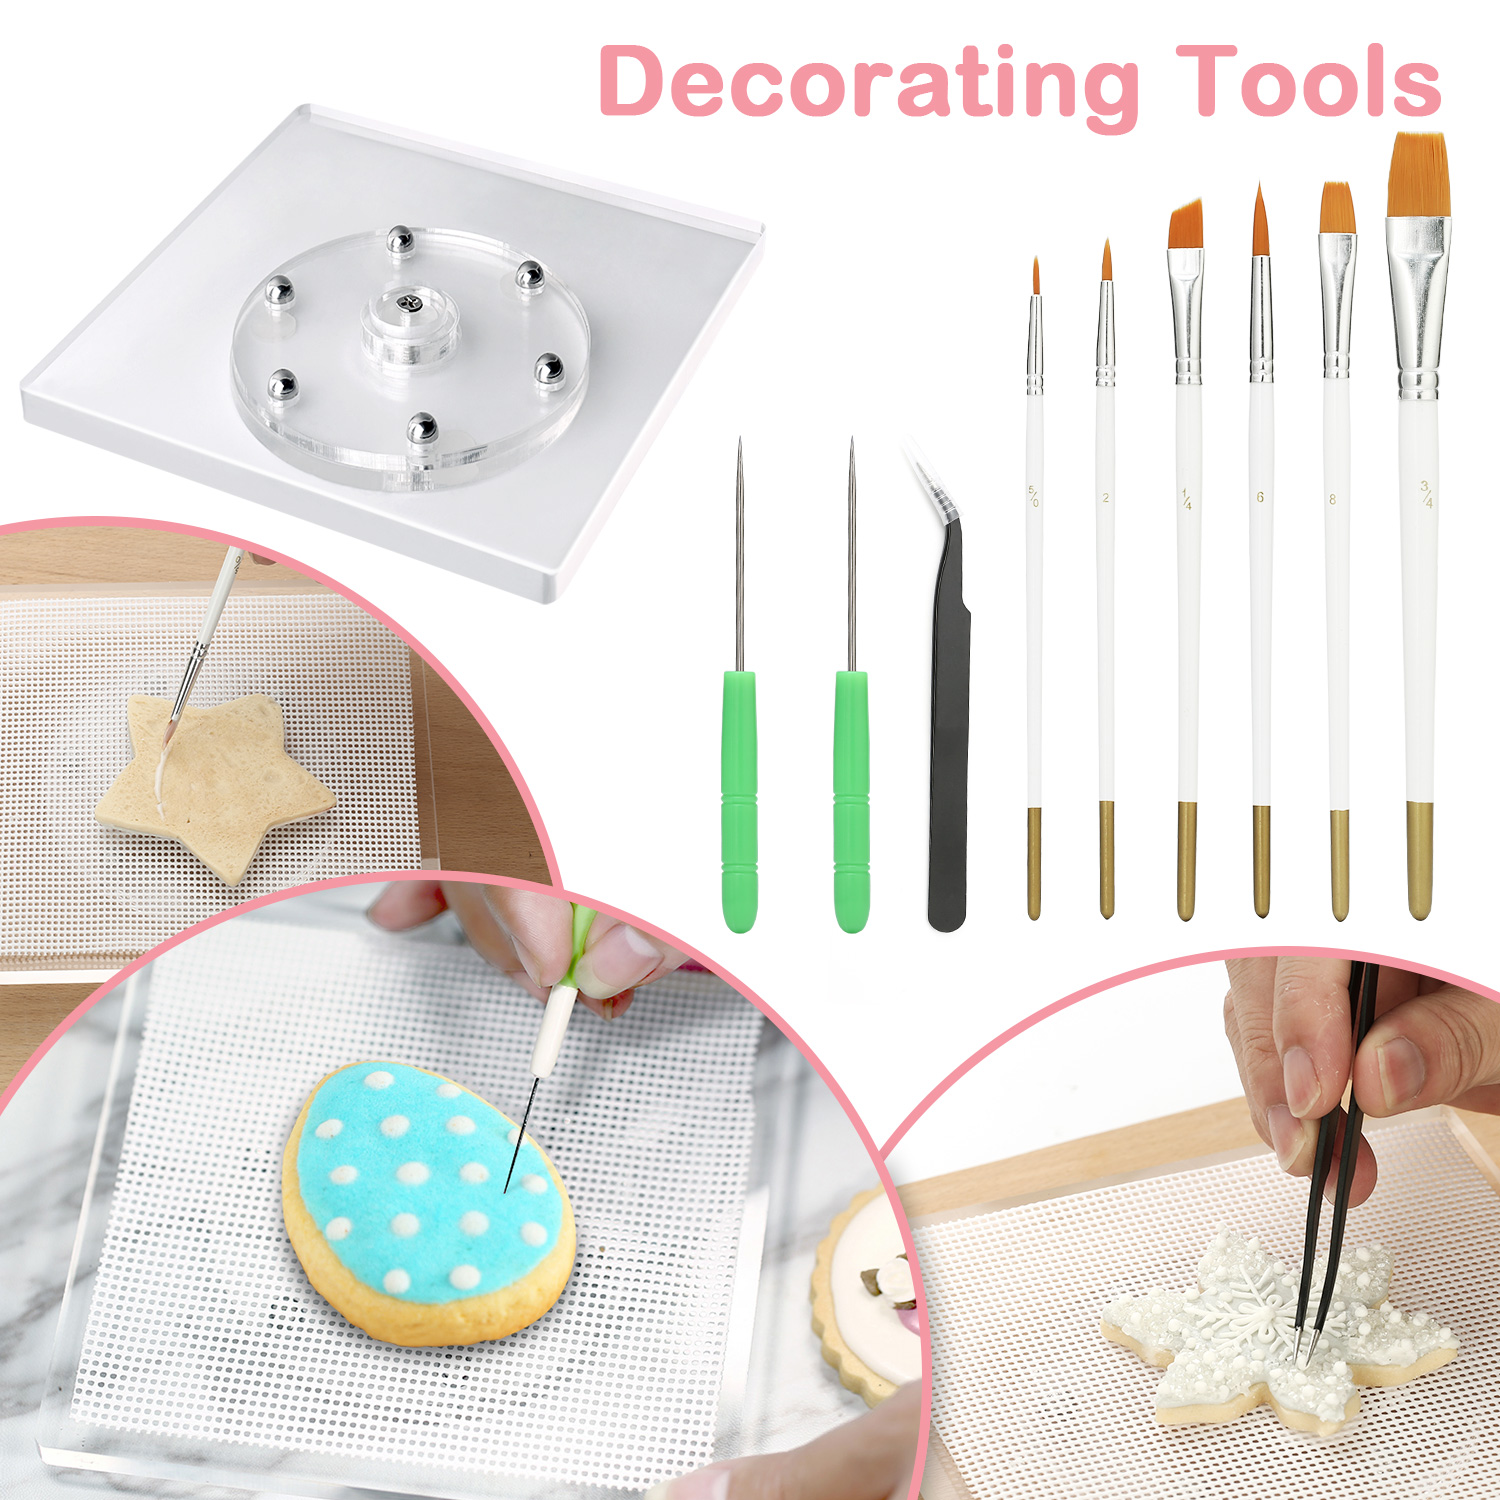 Kasmoire 188pcs Cookie Decorating Kit Supplies- All in one